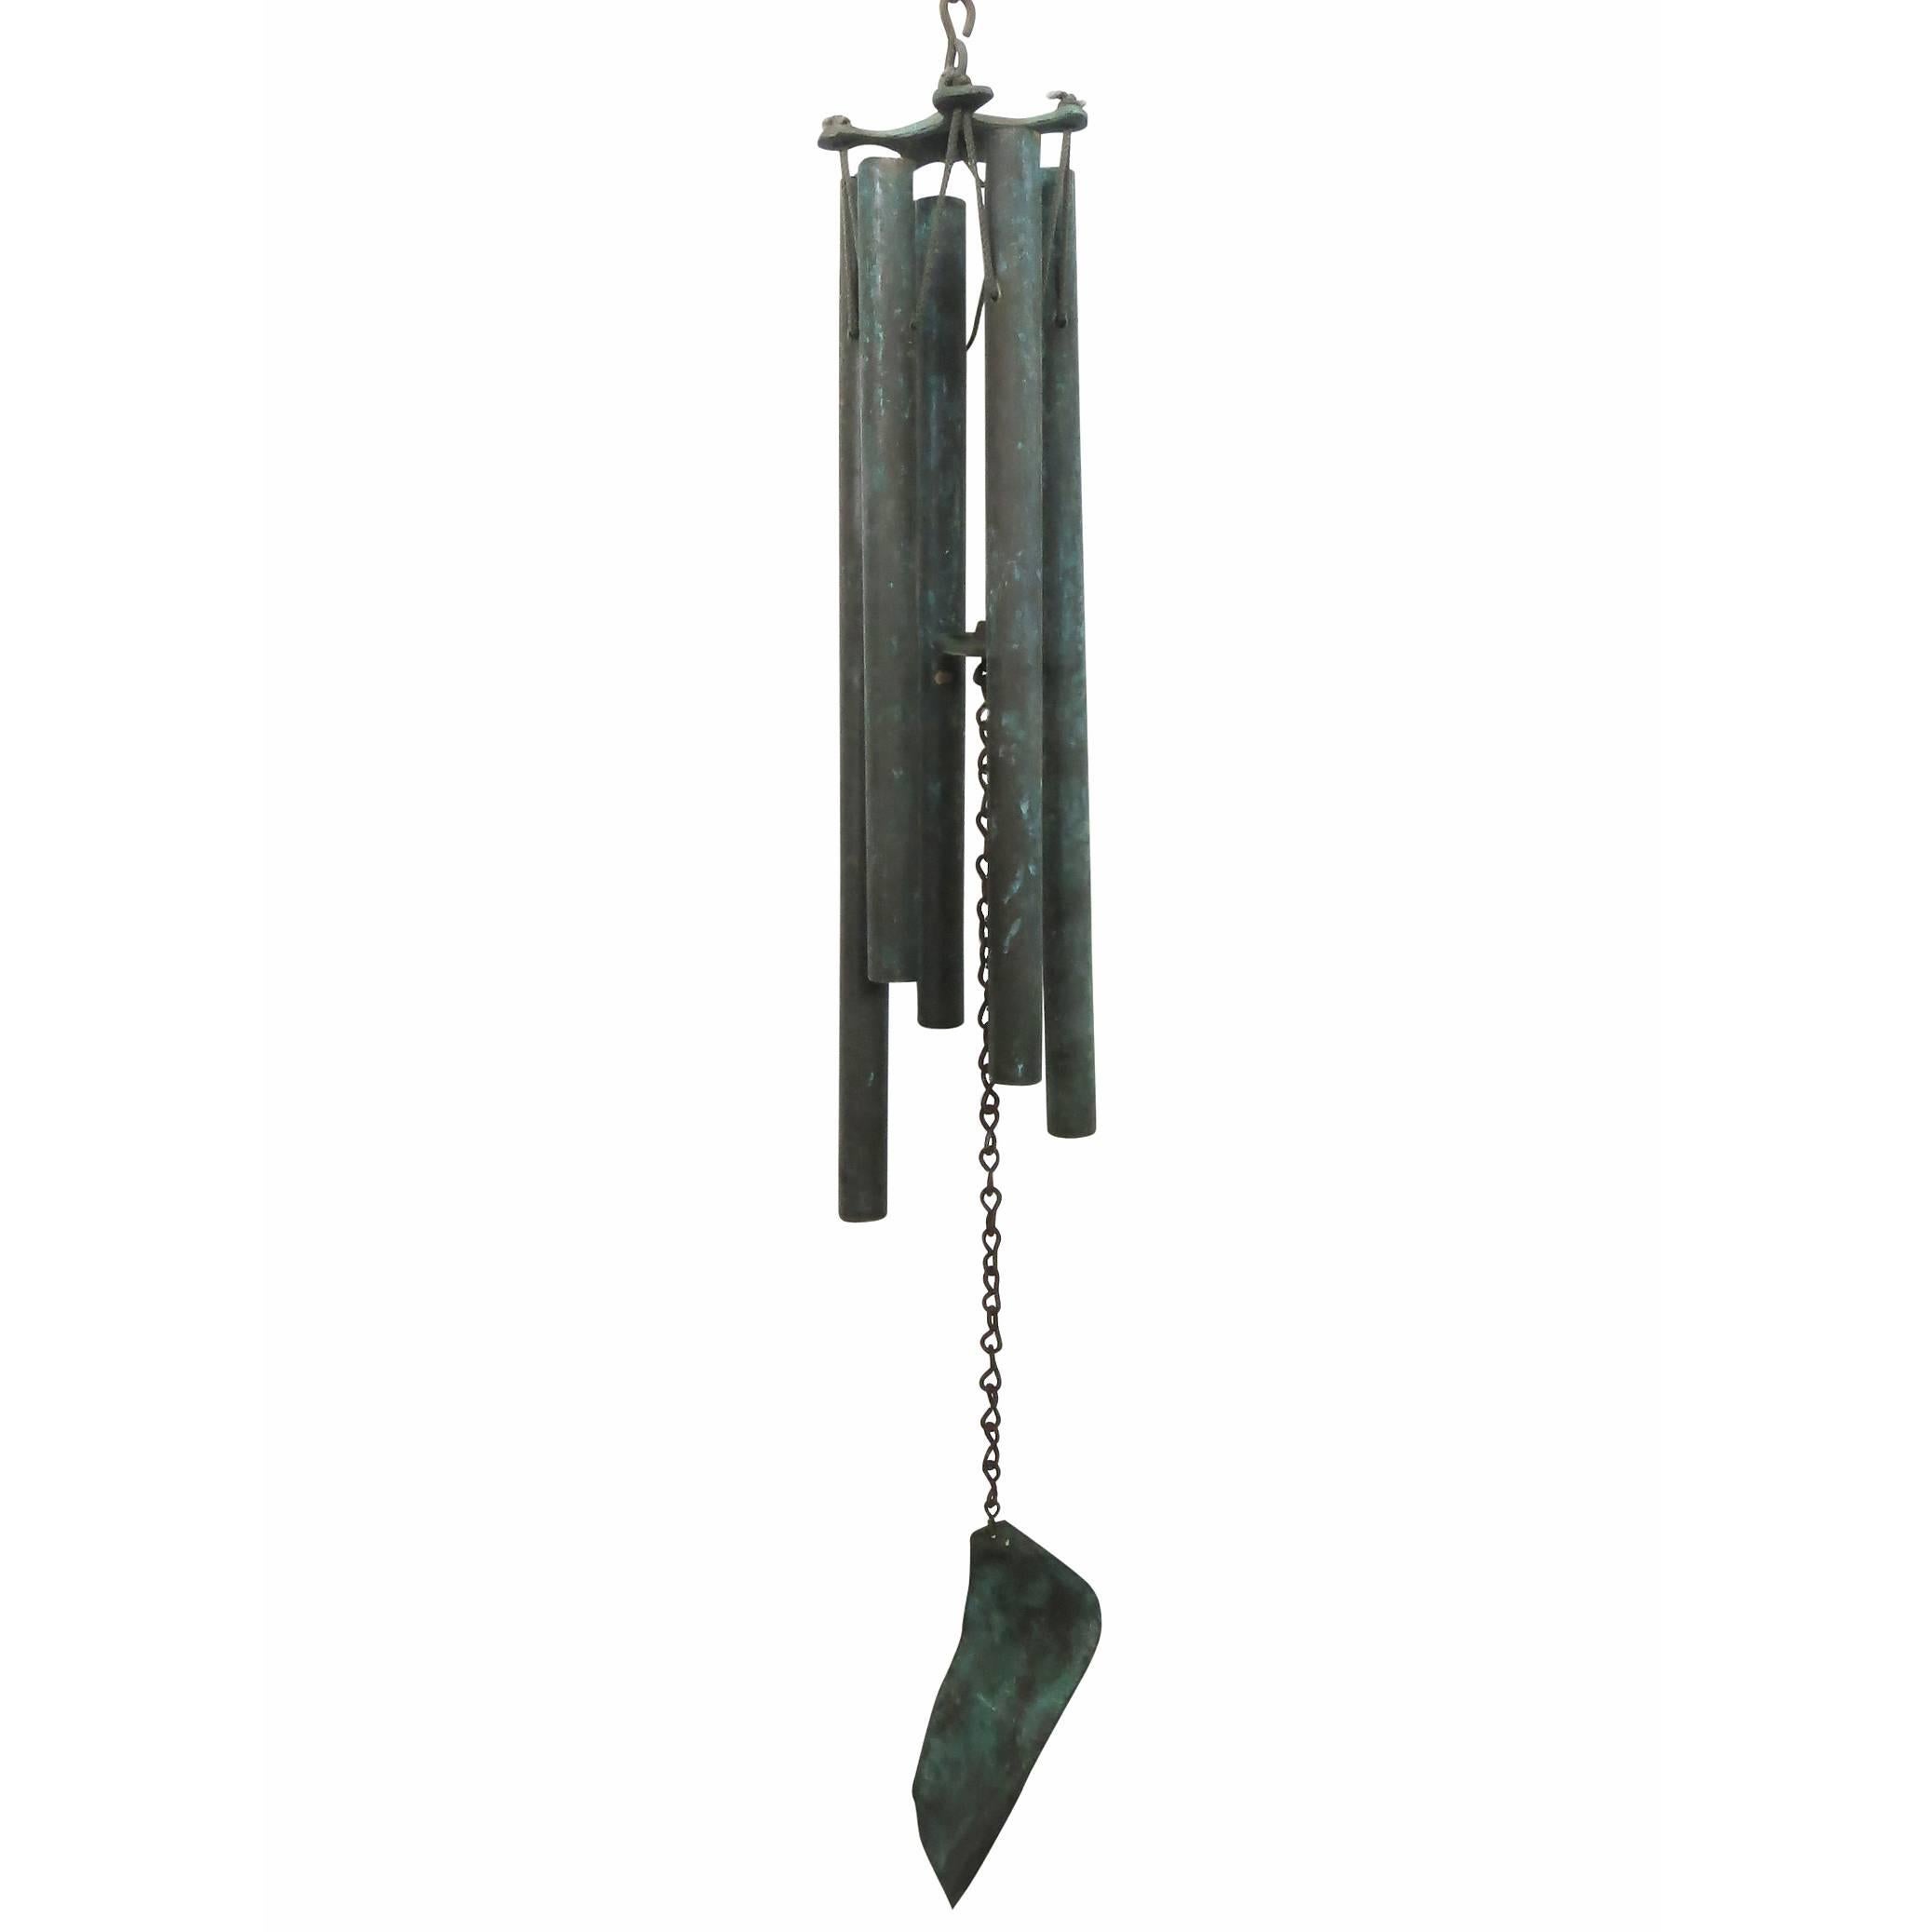  Bronze Modernist Wind Chimes by Walter Lamb